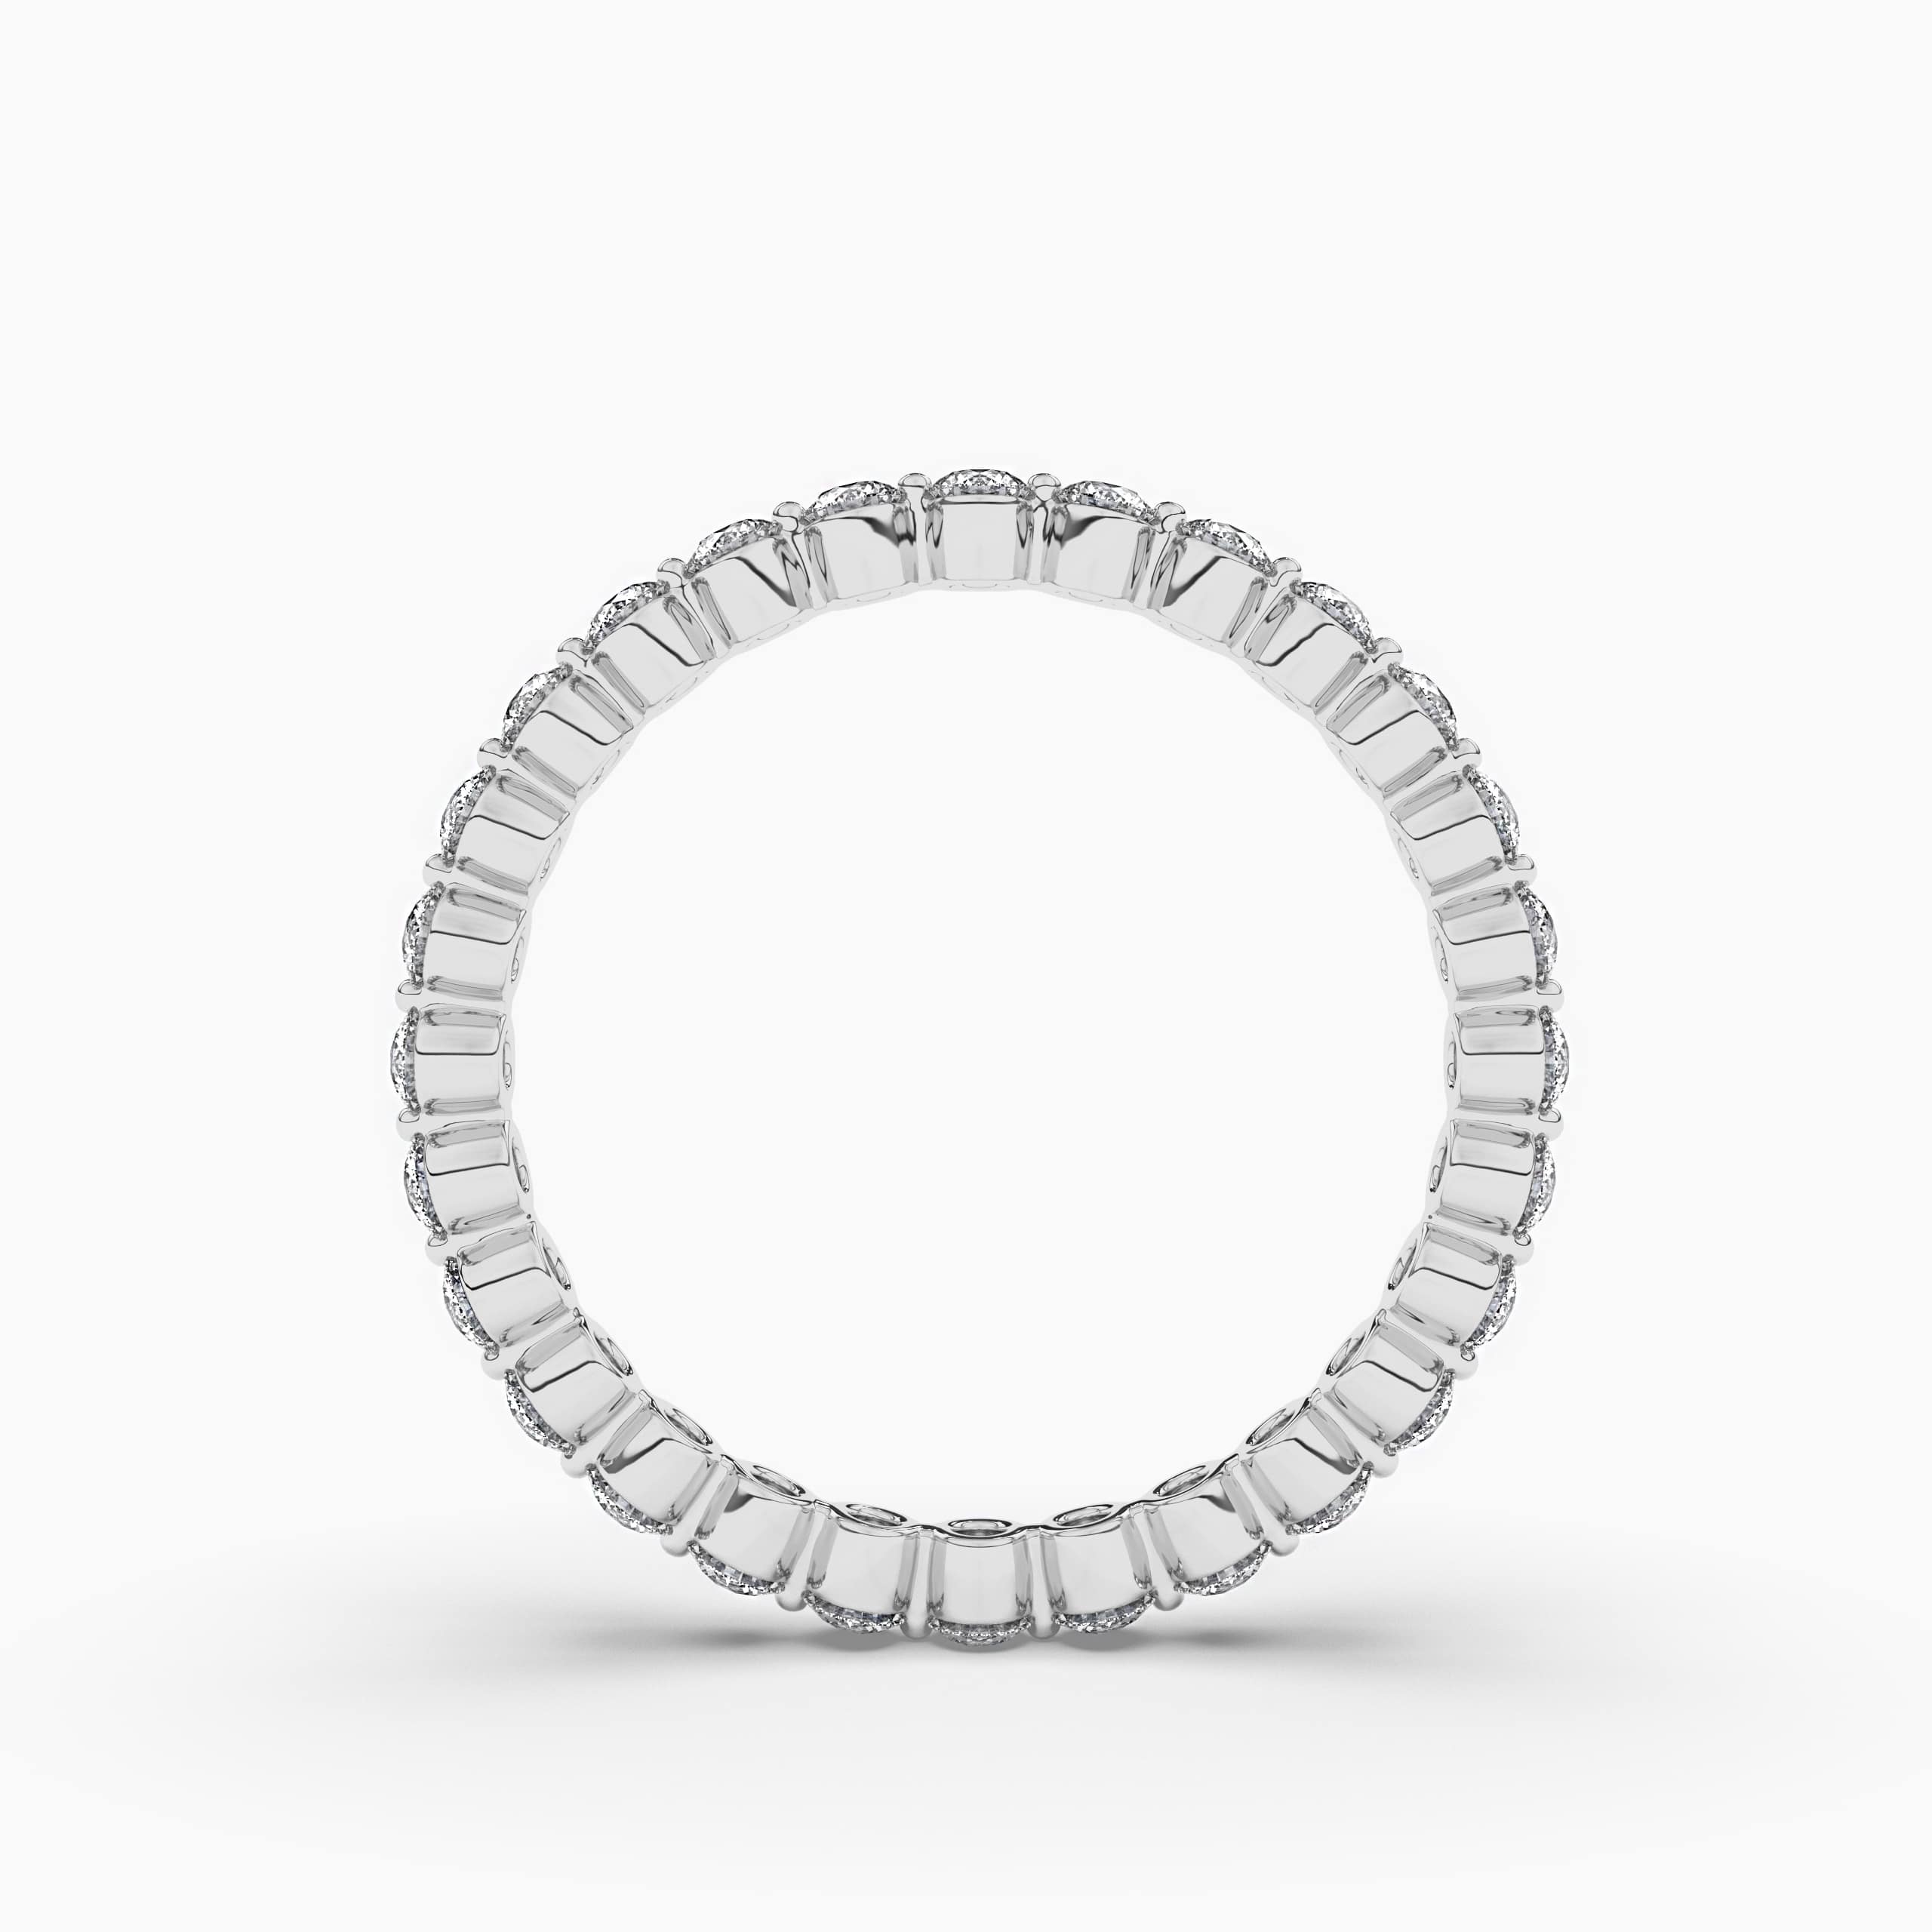 Everything You Need to Know about Eternity Bands